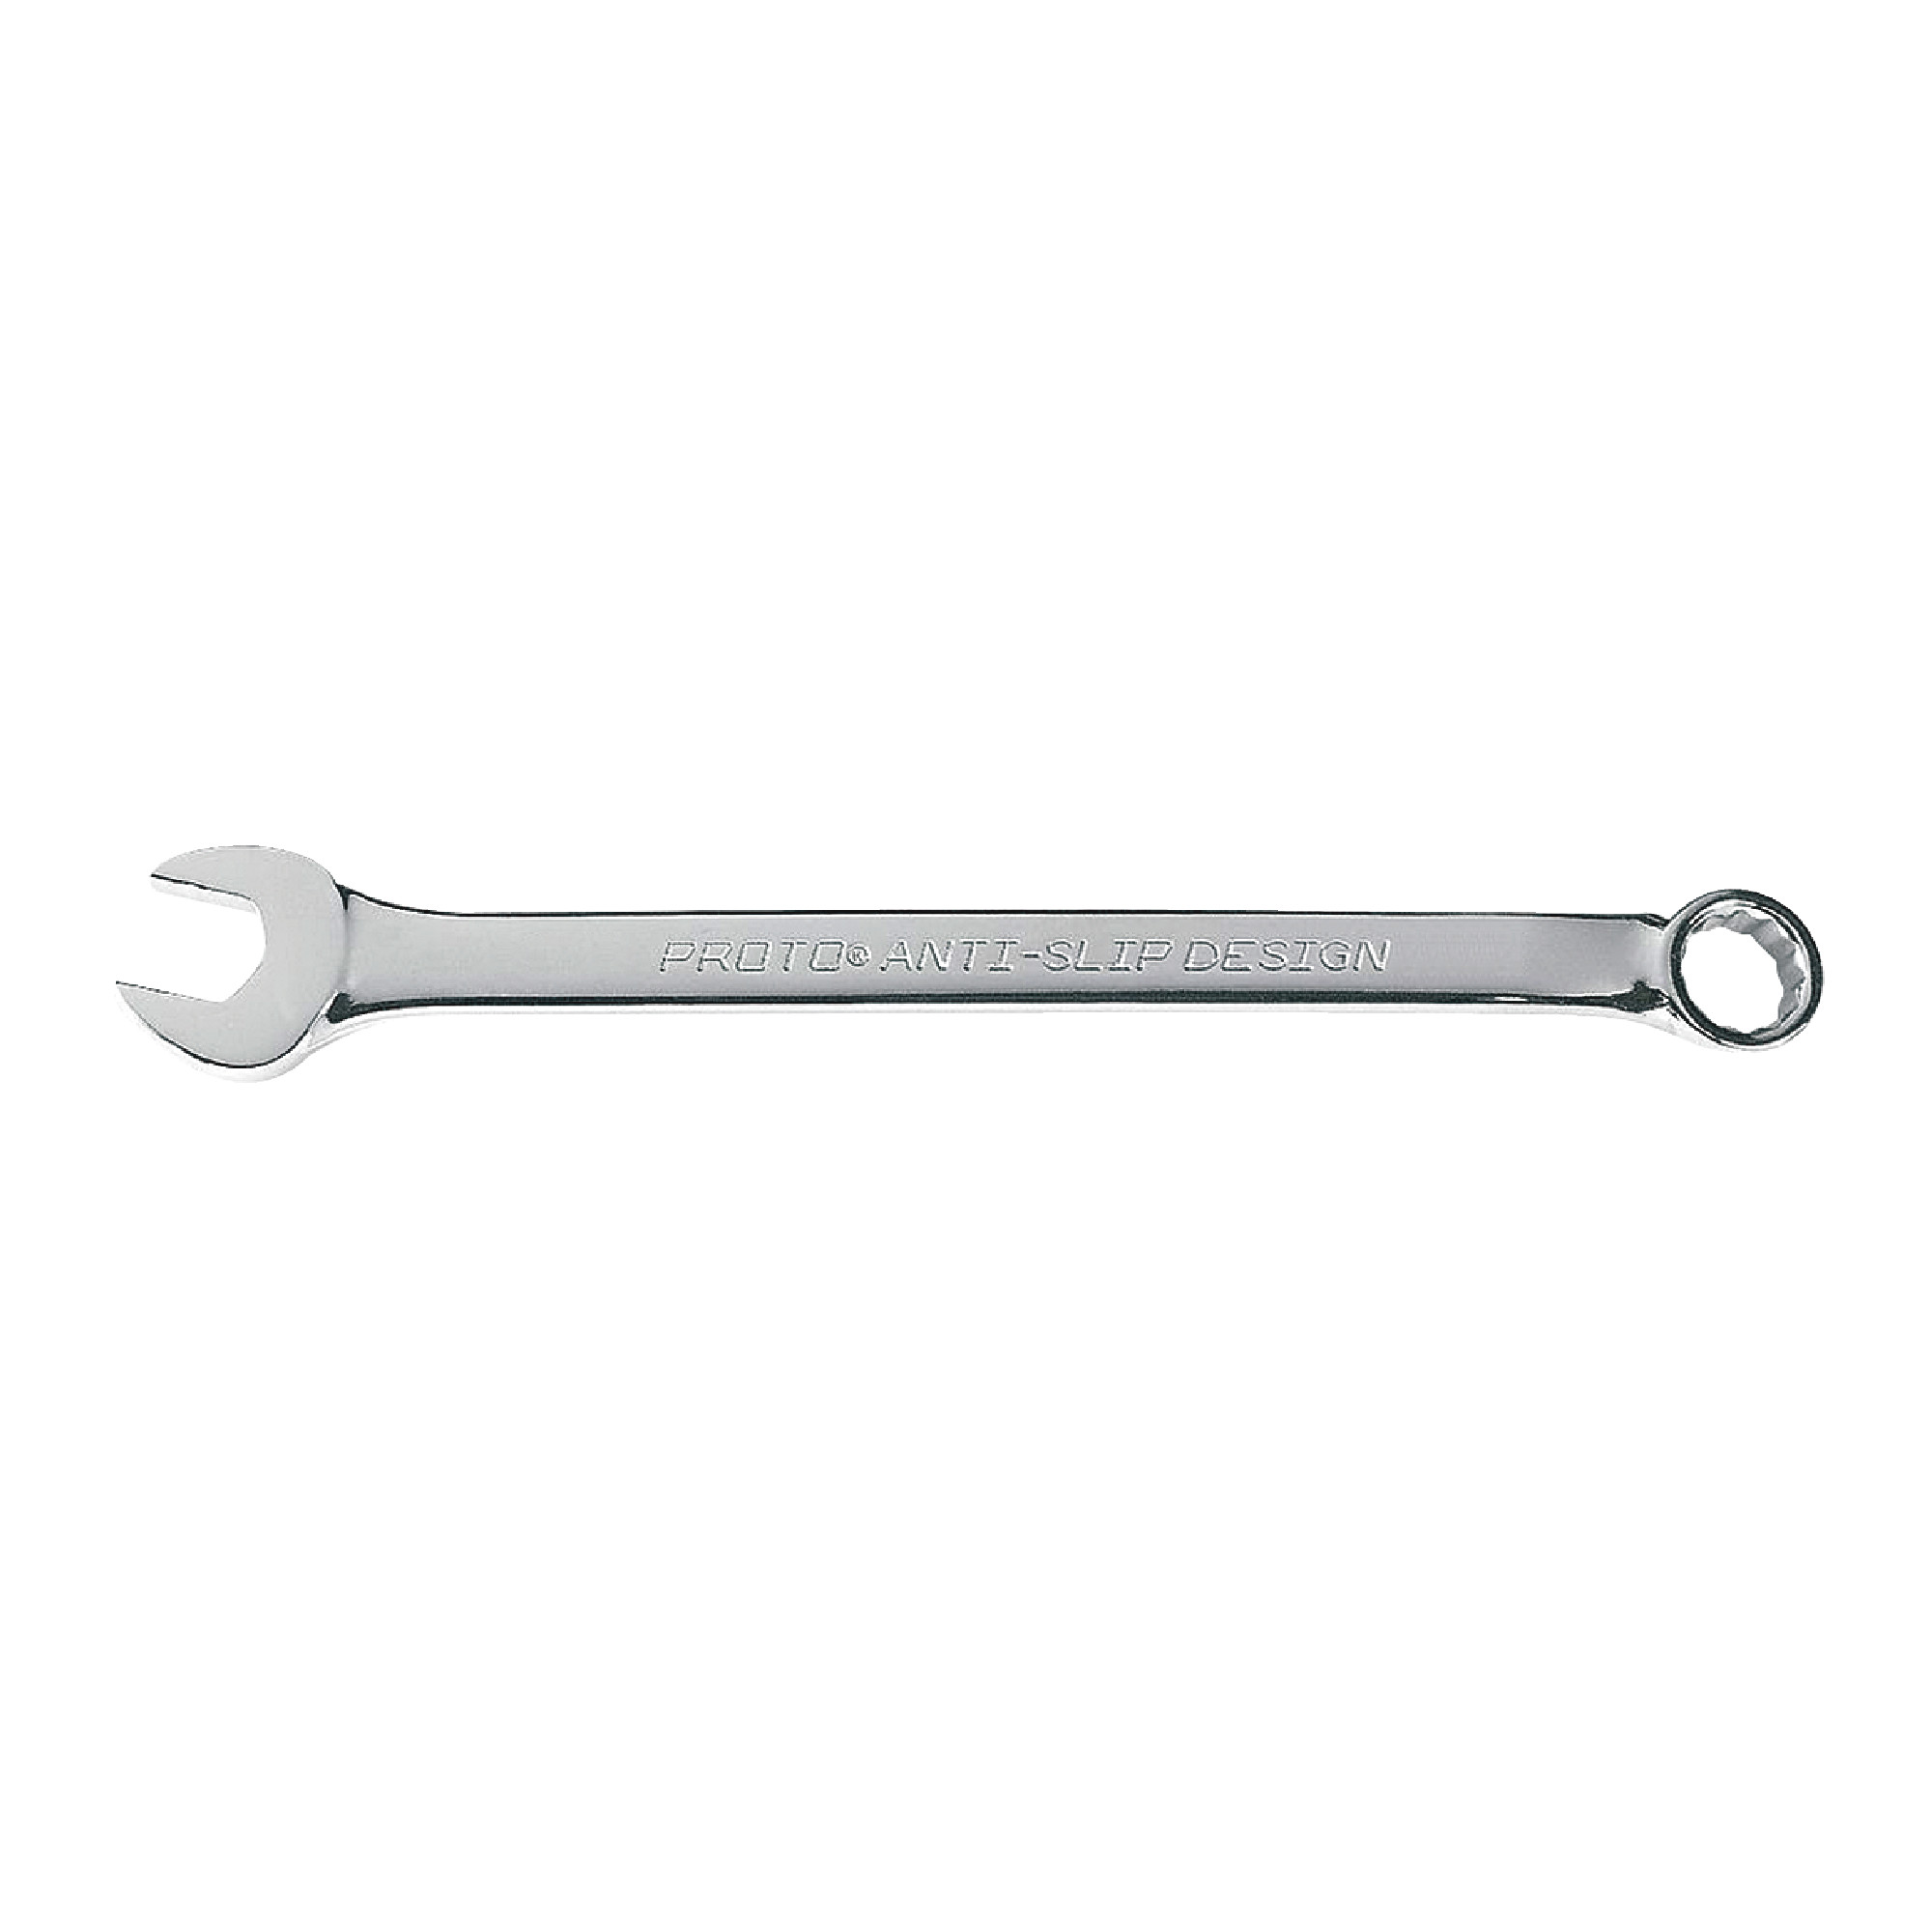 Satin Chrome Finish 18mm Combination Wrench